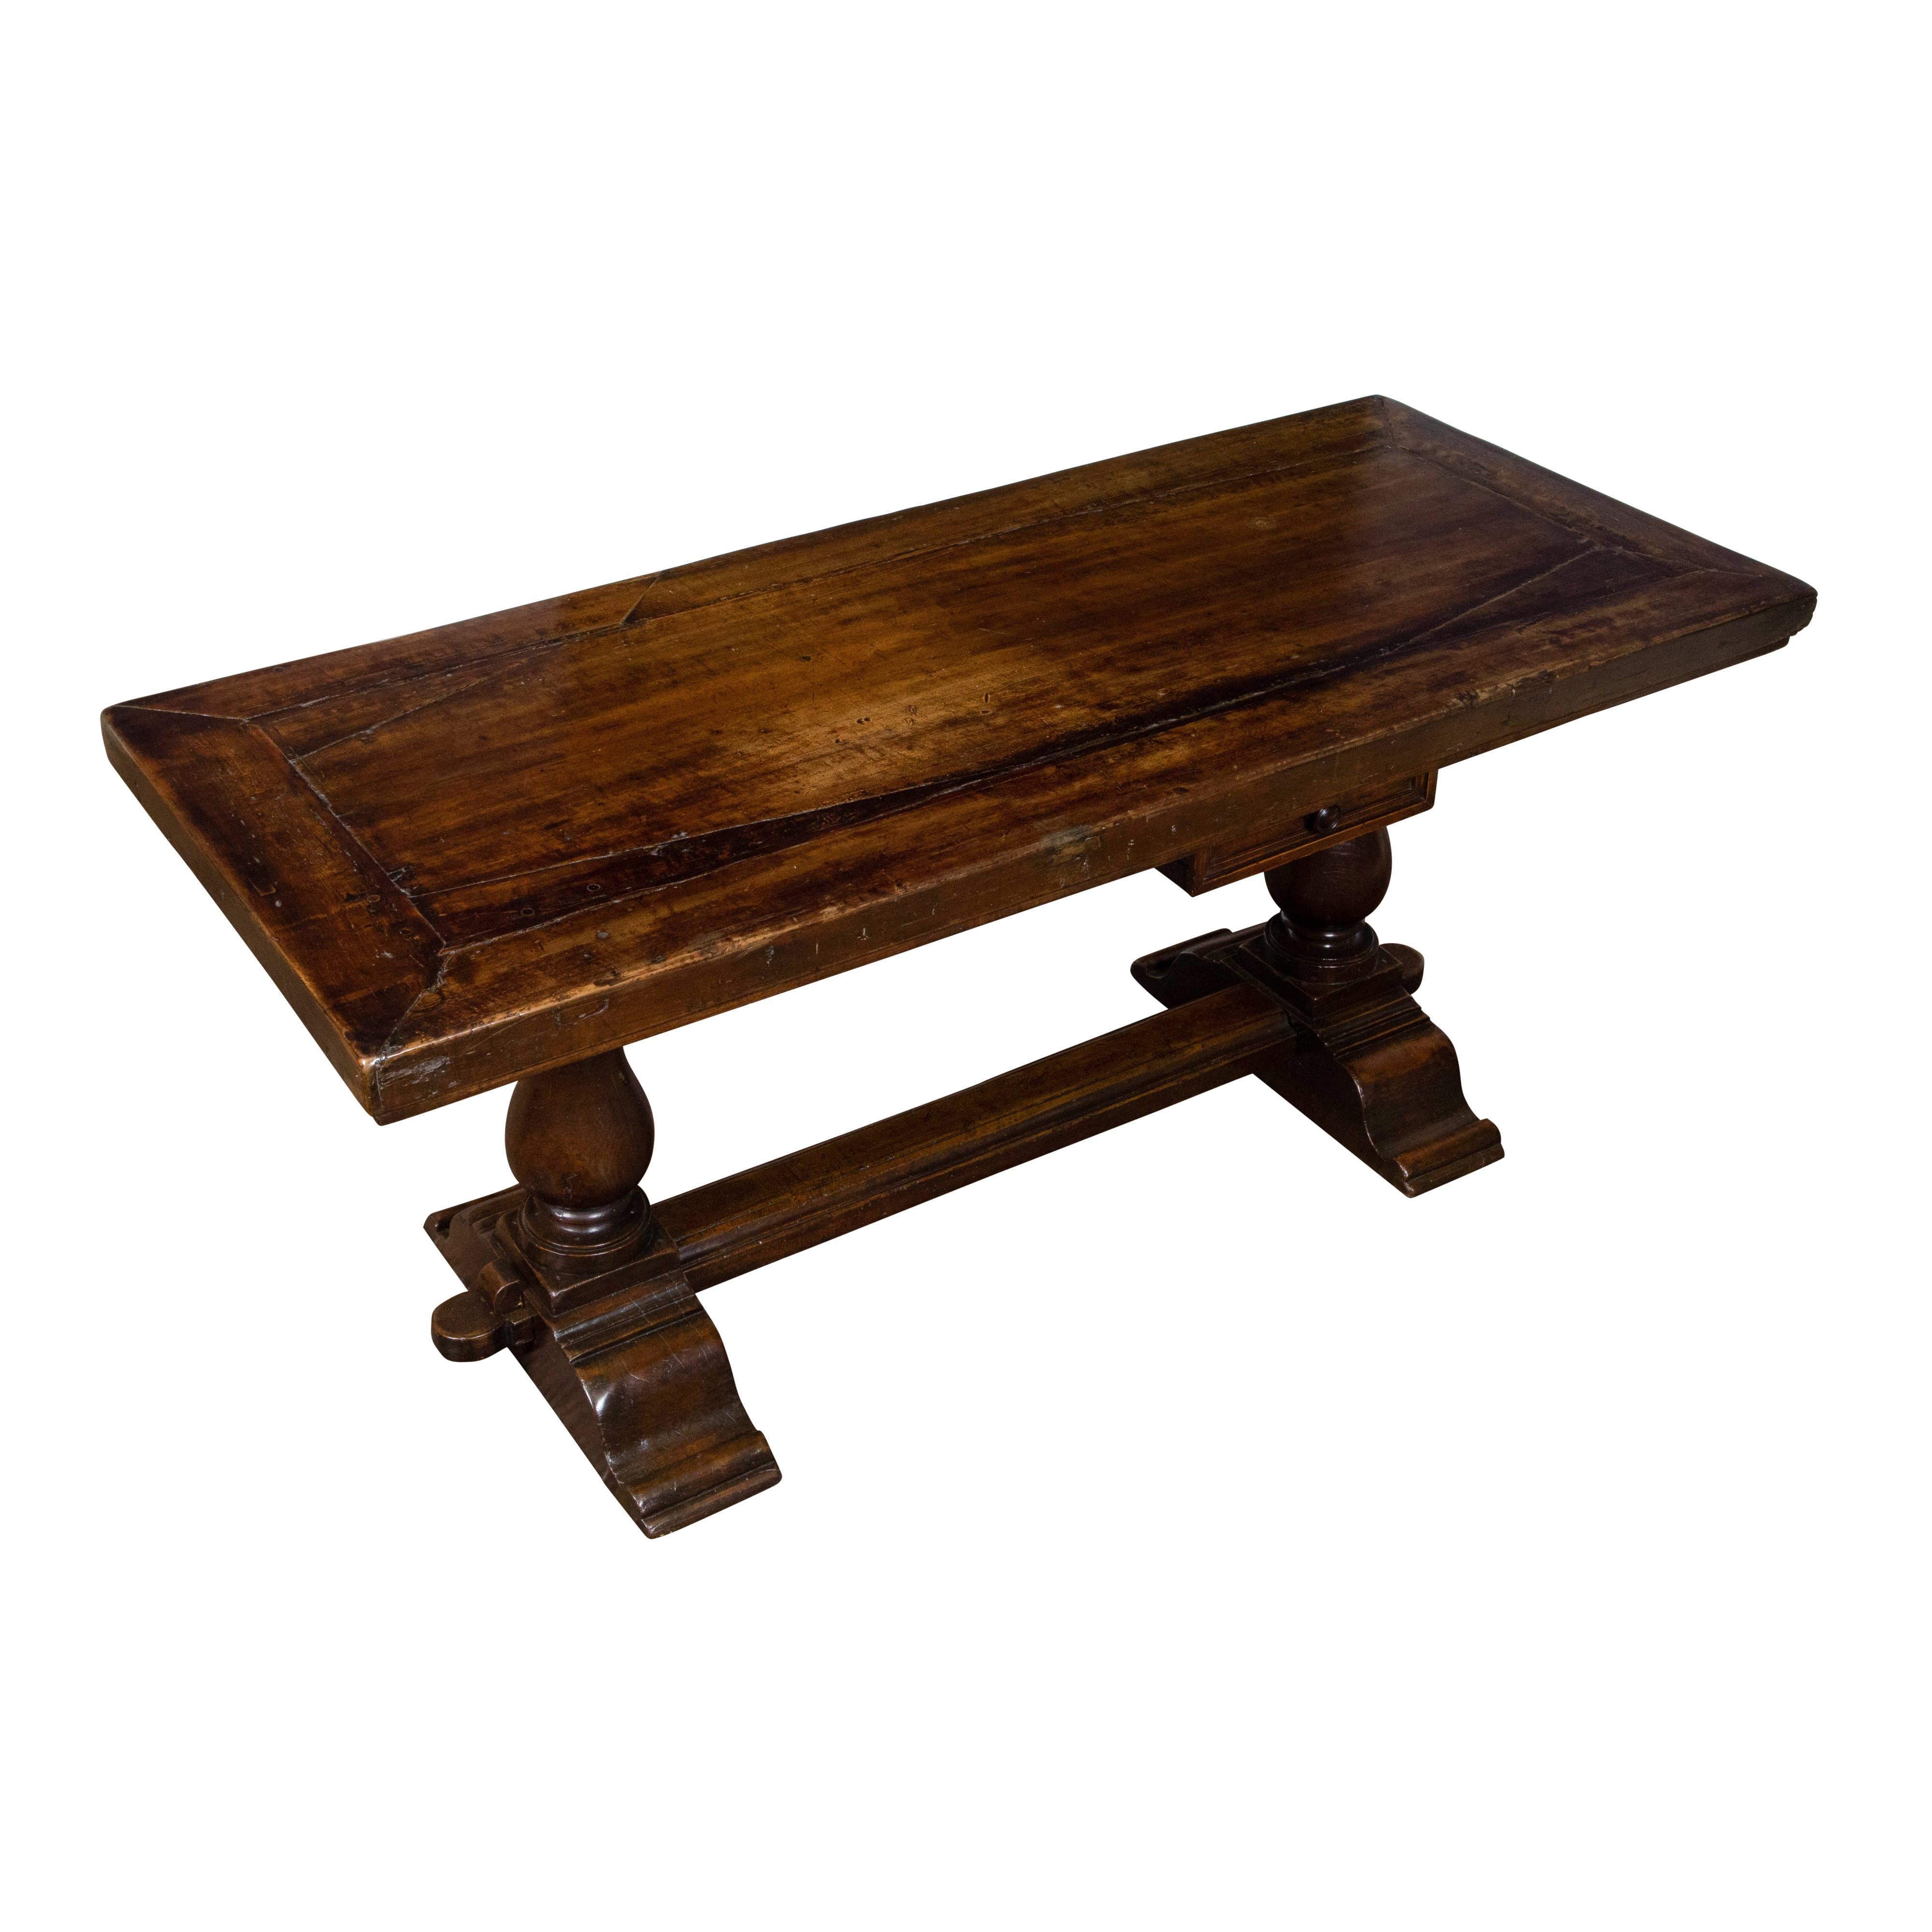 Early Italian 19th Century Walnut Table with Trestle Base and Single Drawer For Sale 3